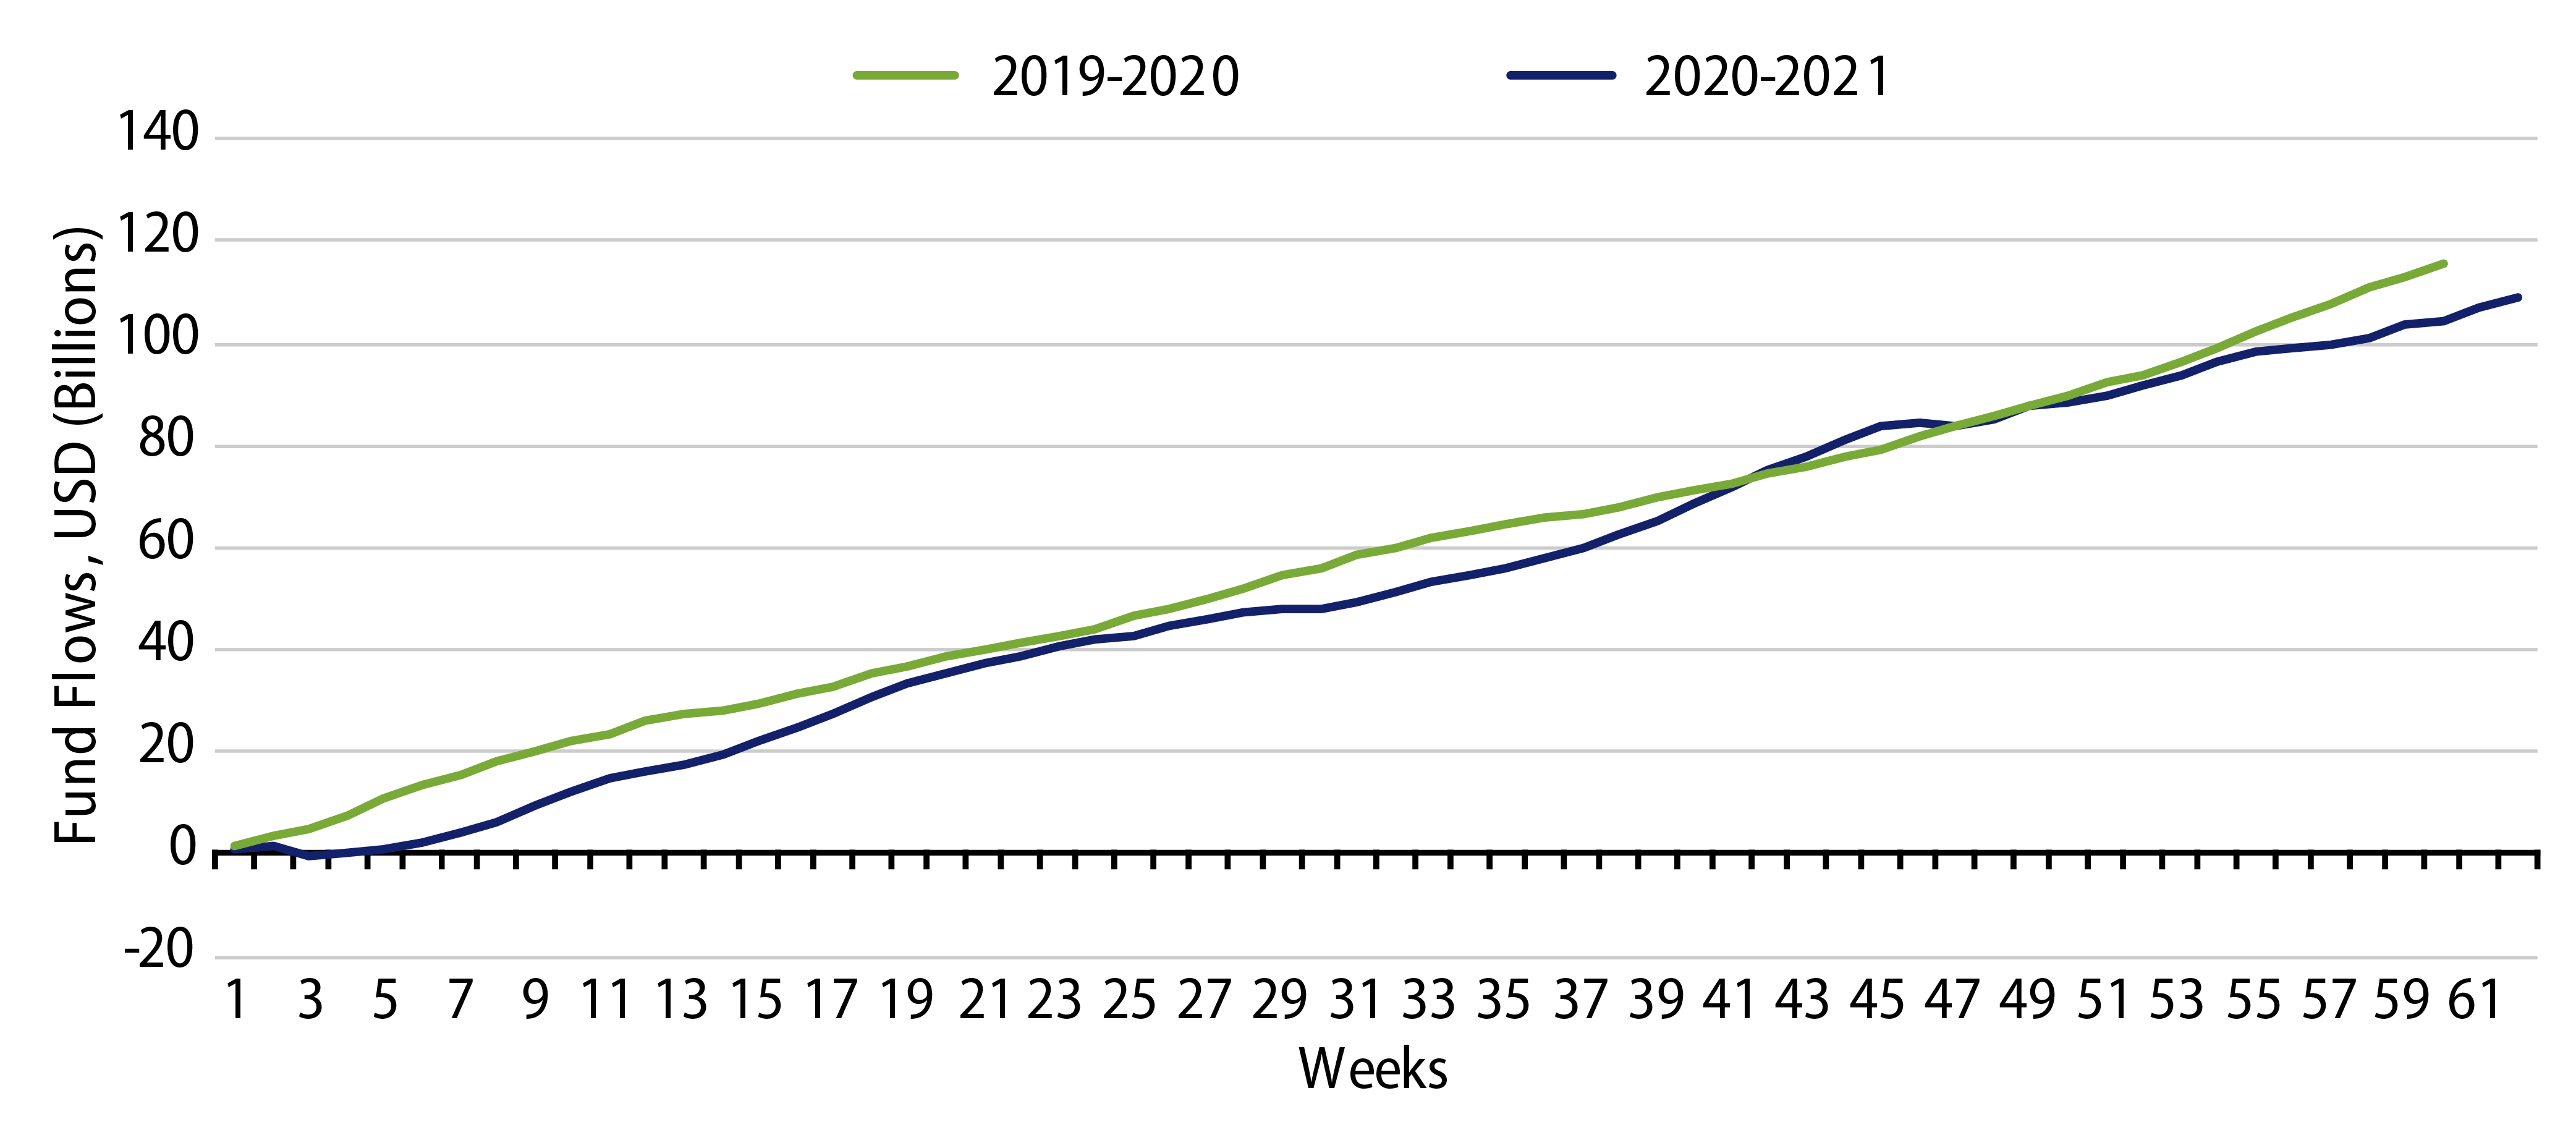 Explore Inflow Cycles—Comparing 2019-2020 with 2020-2021